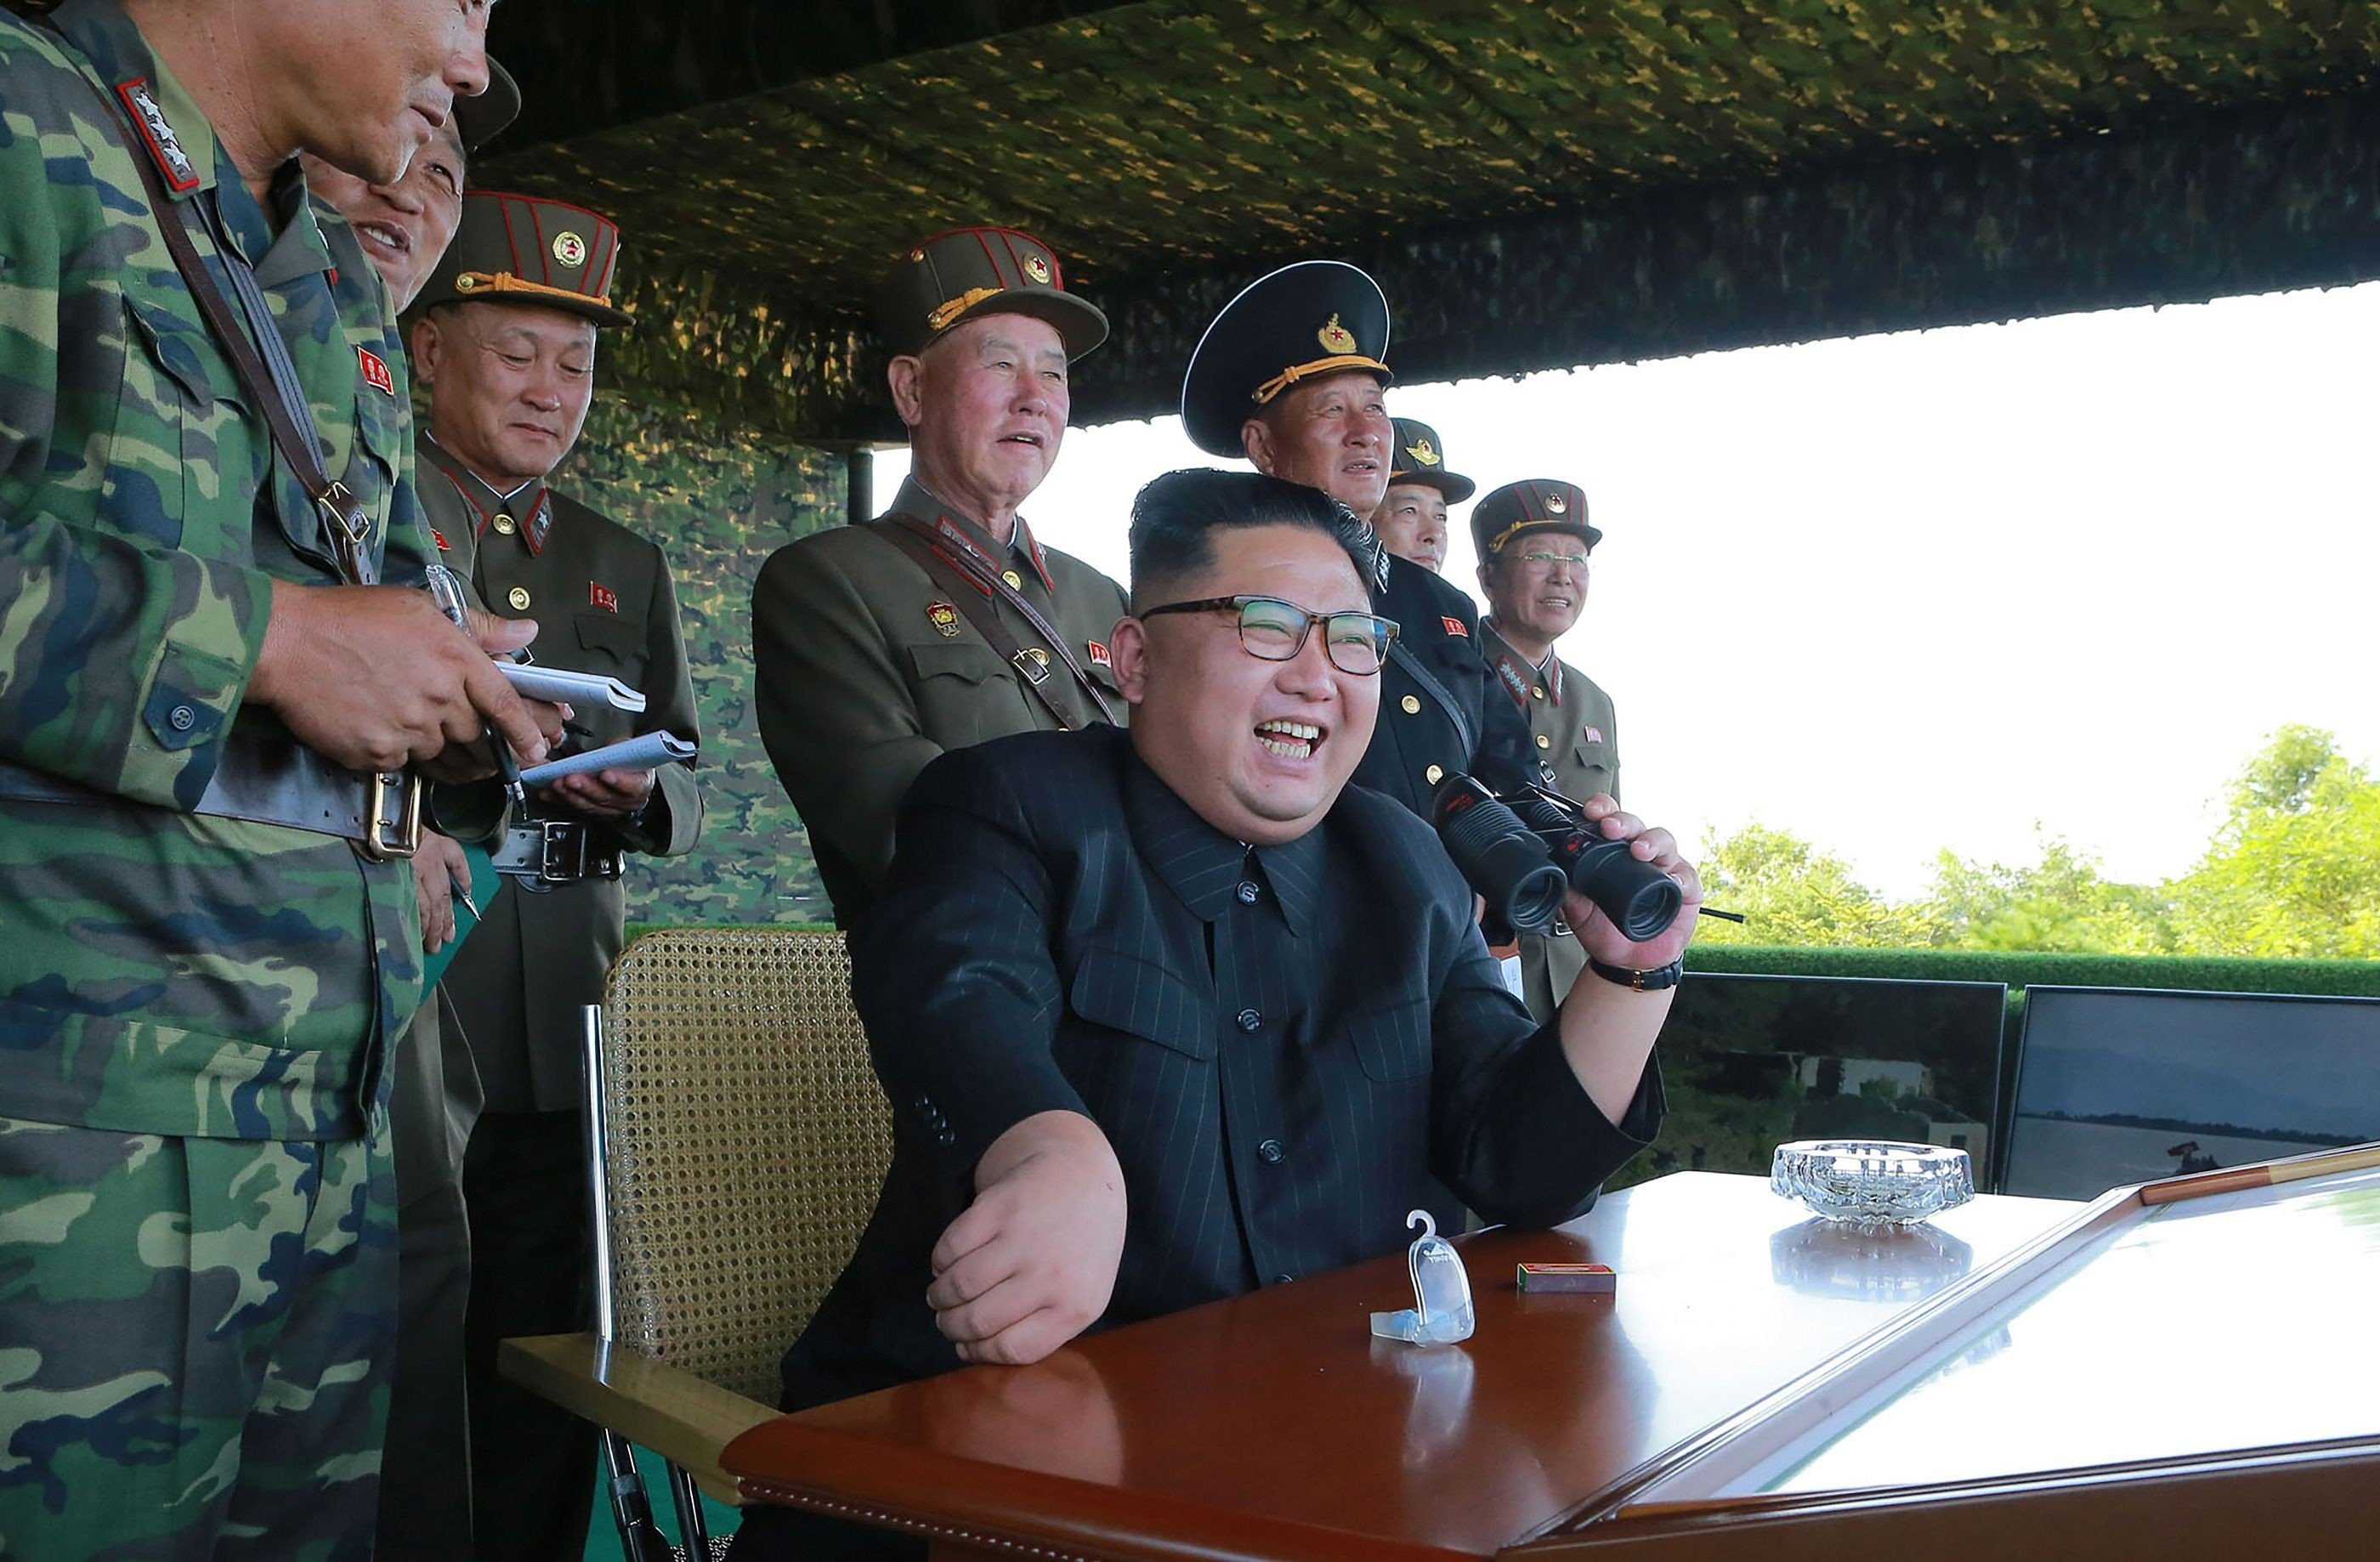 North Korean leader Kim Jong-un presides over a target strike exercise conducted by the Korean People’s Army at an undisclosed location, in an undated photo released on August 26. North Korea fired three short-range ballistic missiles on the day, the US military said. Photo: AFP/ KCNA via KNS